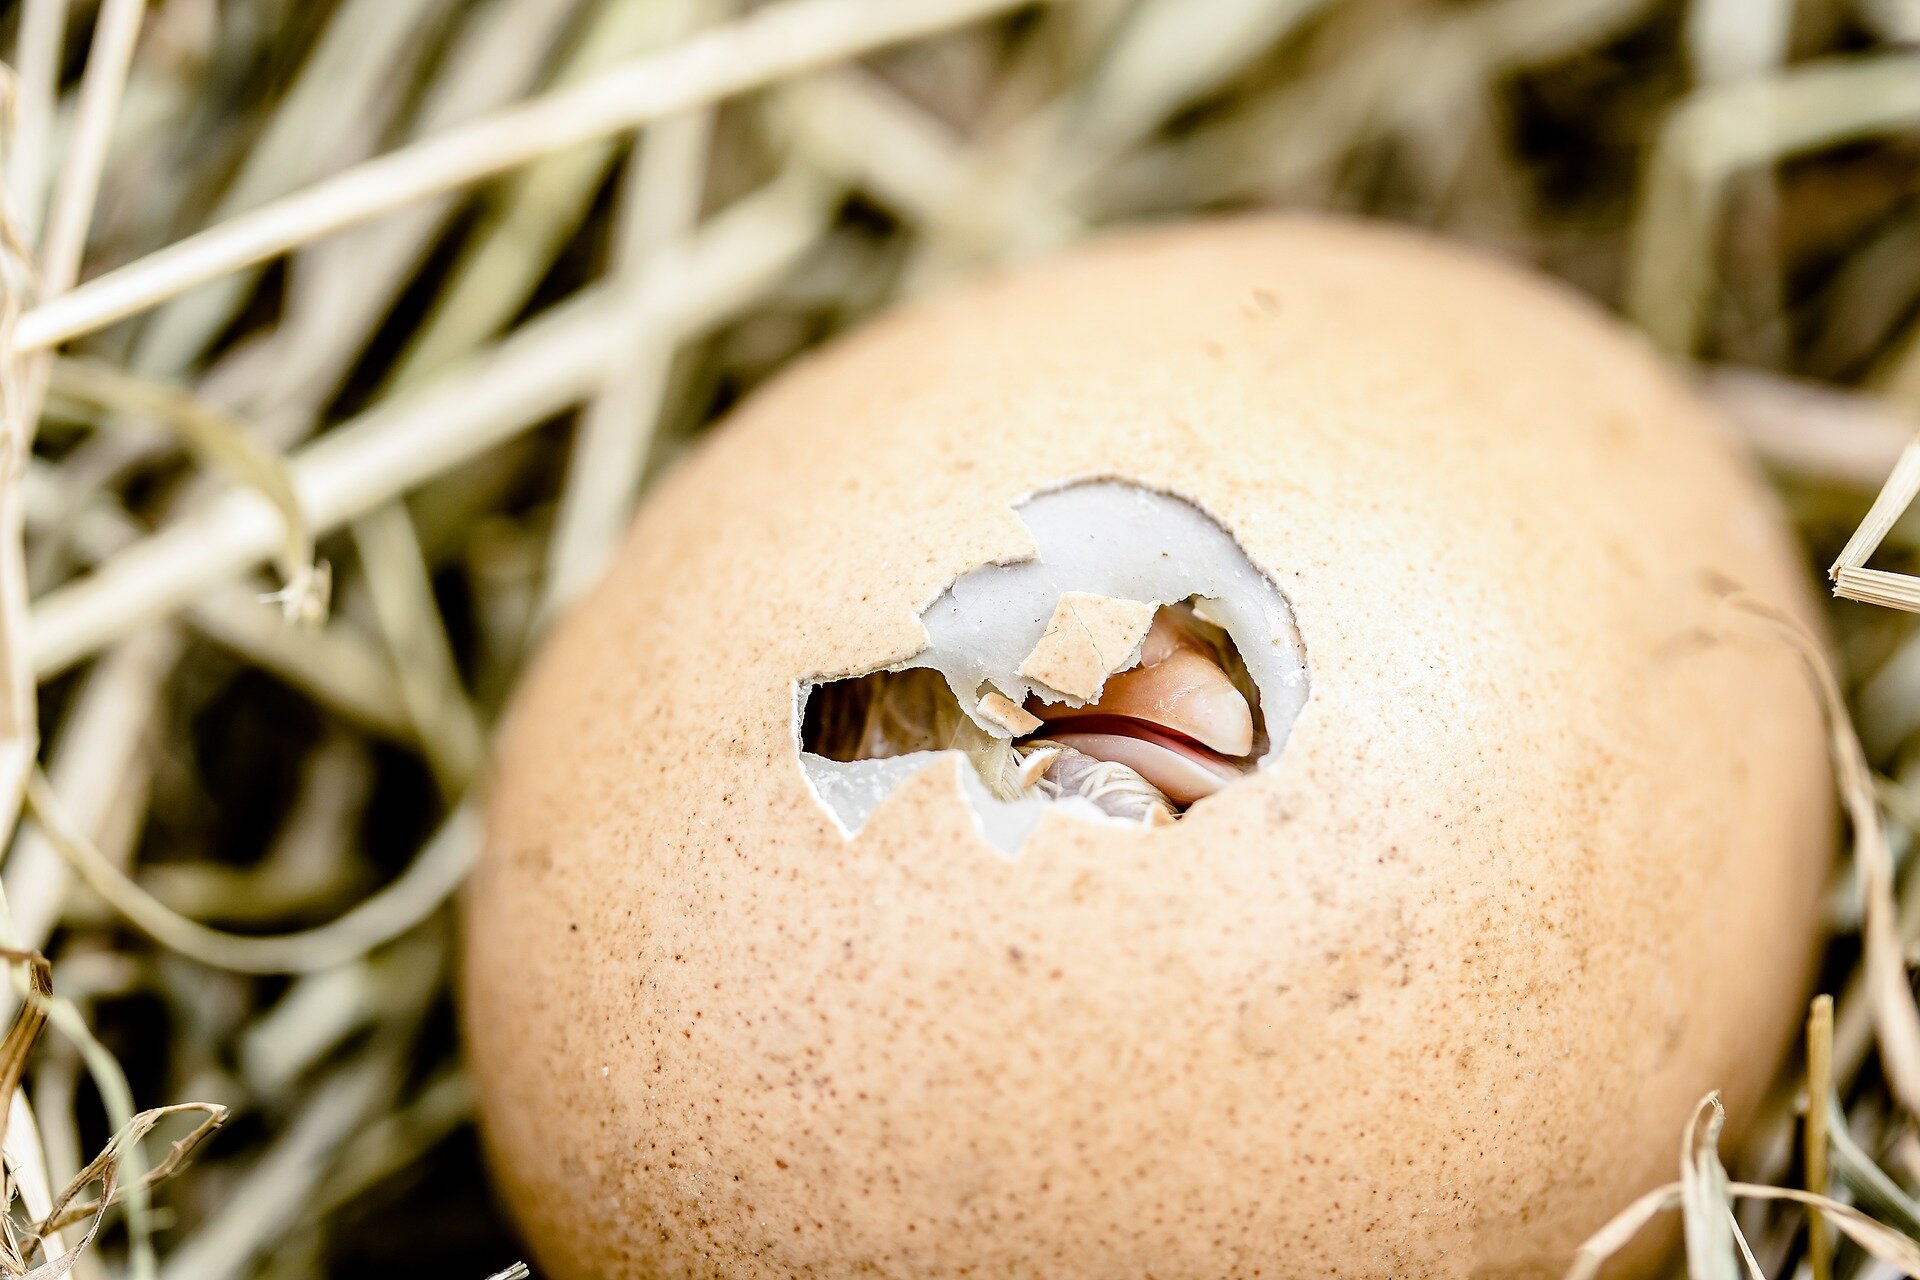 #Newborn chicks are attracted to objects that move upwards, shows study